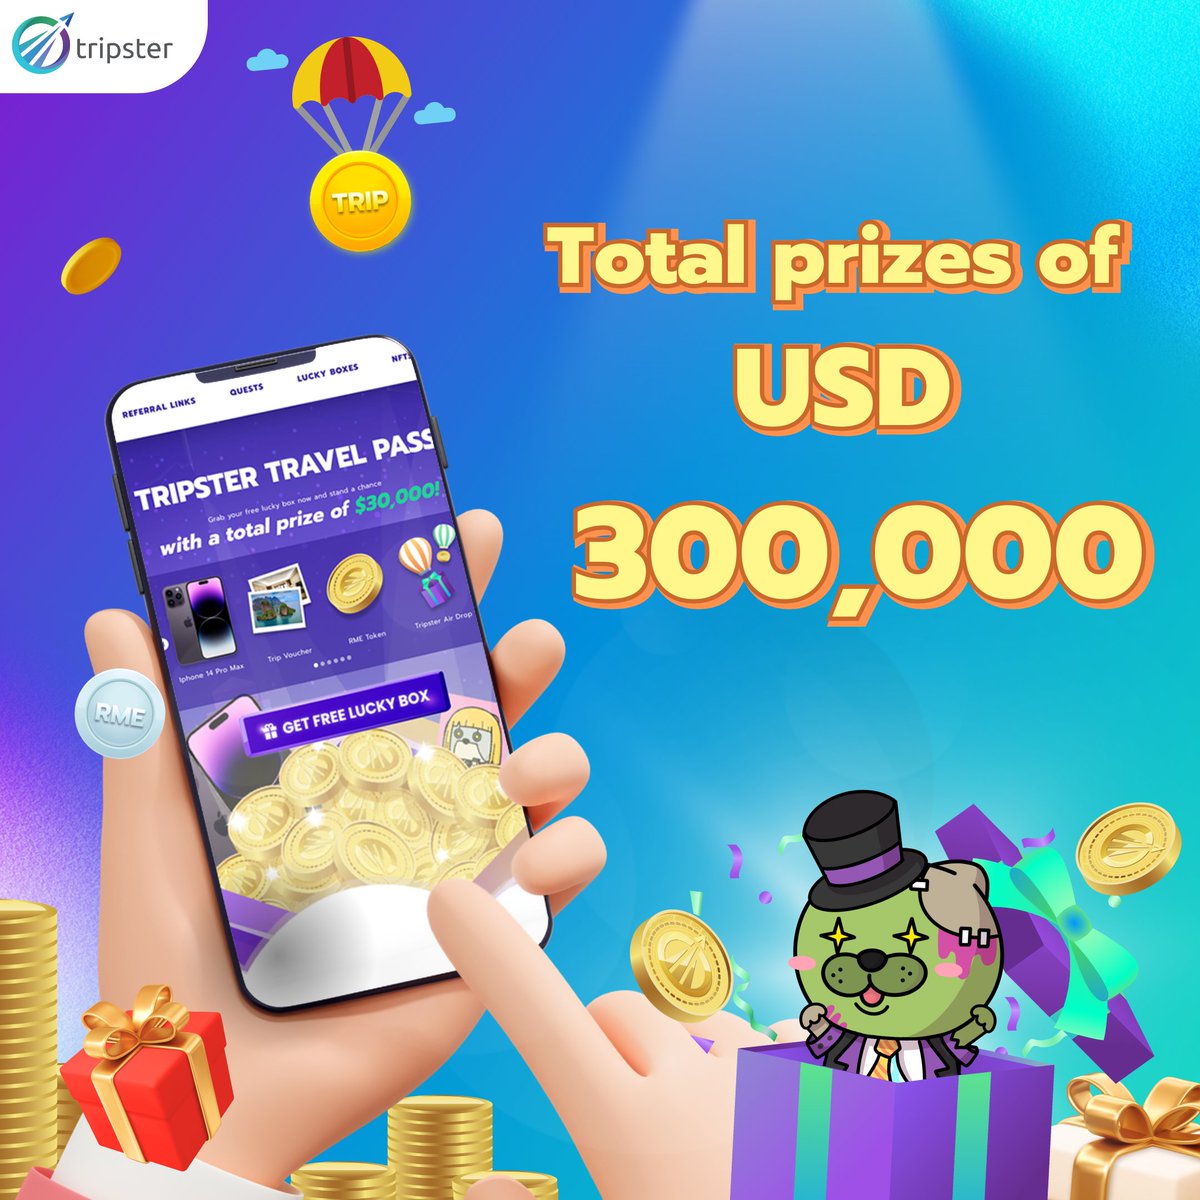 We have 2 Lucky boxes to get the prize

🎁Digital Box
Web3 Rewards :
1 ETH , Bluechip NFT , NFT Tripster , RME token

🎁Giftset Box
Physical Rewards :
iPhone 14 Pro Max, 5 Star Hotels,Travel Activity, RME token